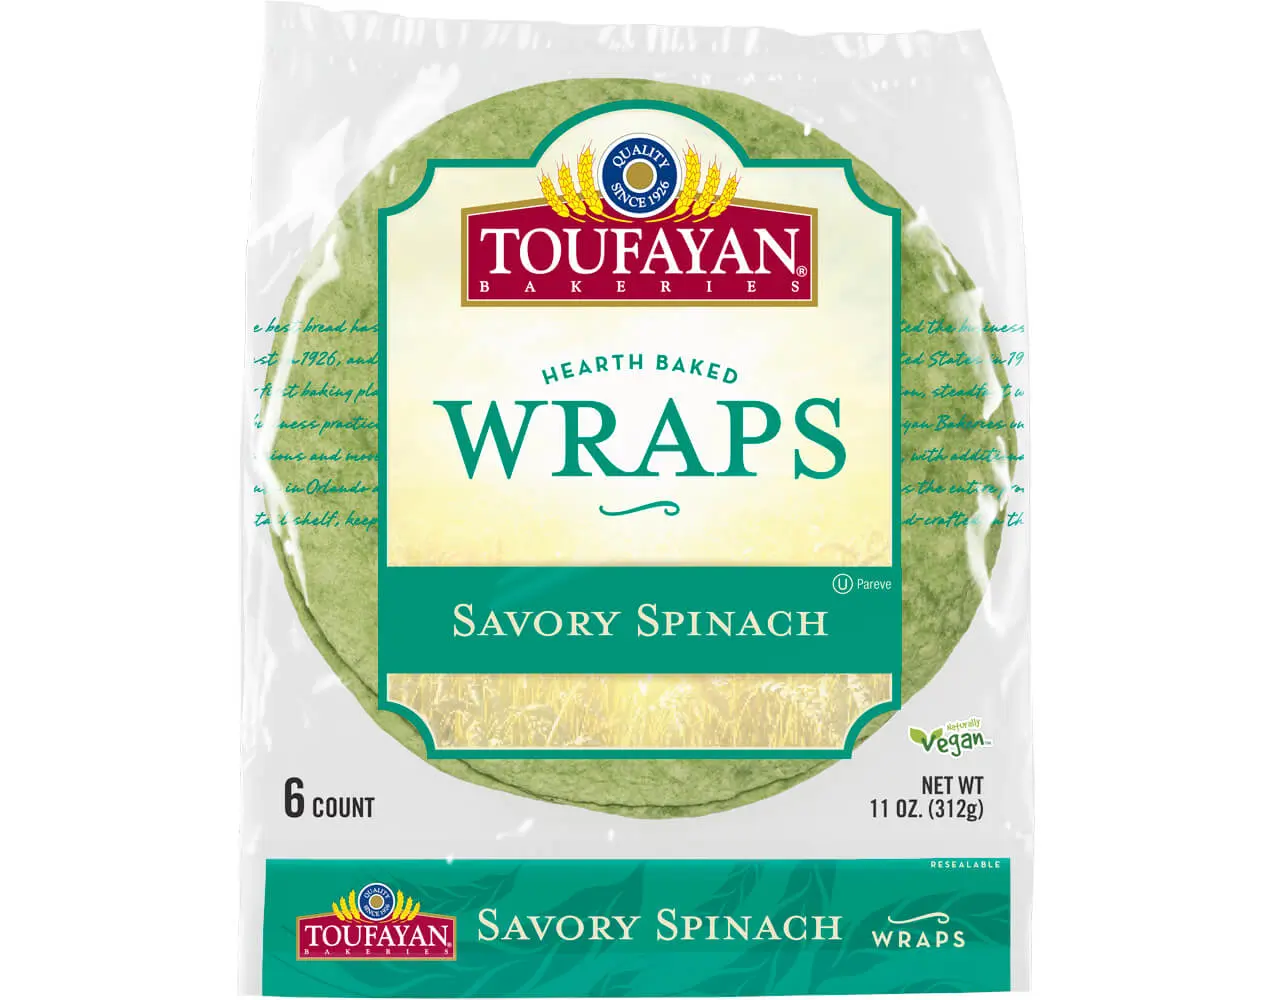 Savory Spinach Wraps